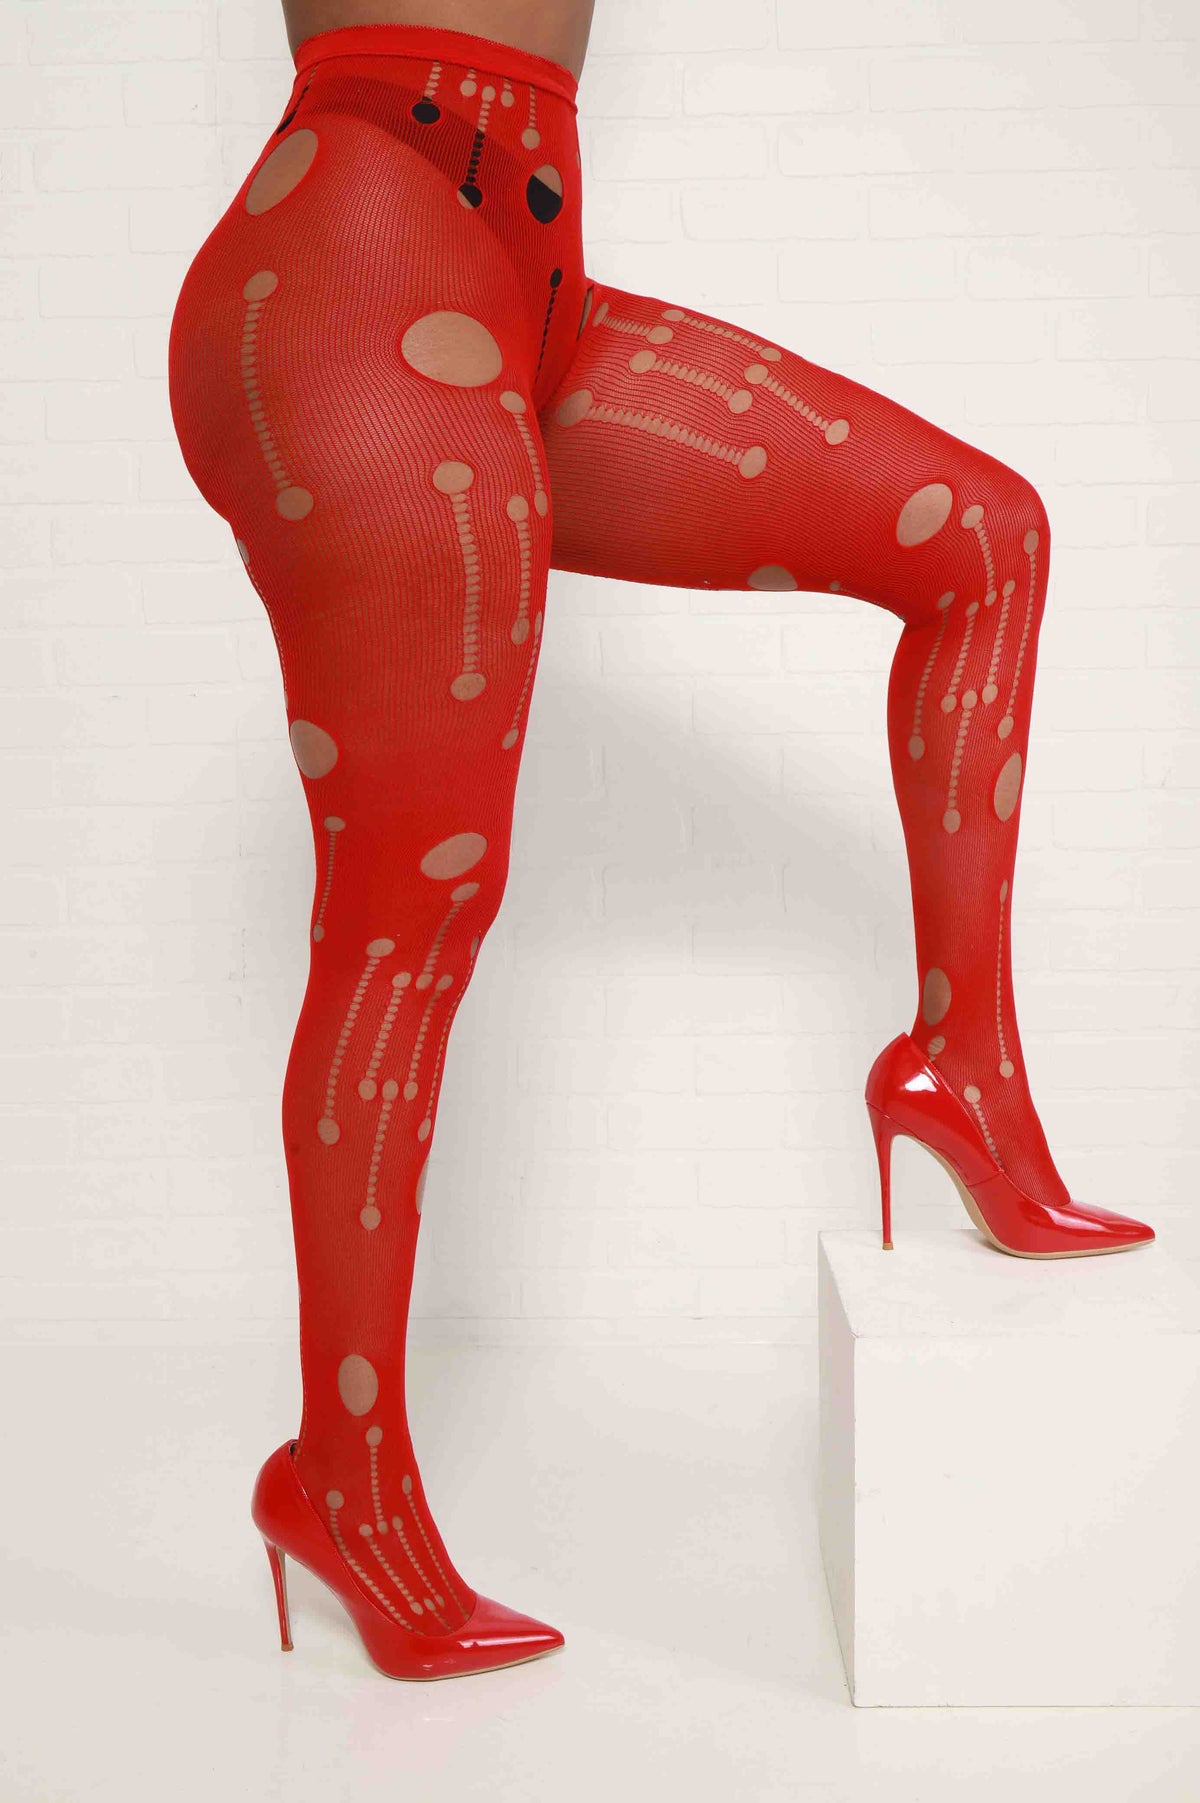 Adult Red Fishnet Pantyhose, $11.99